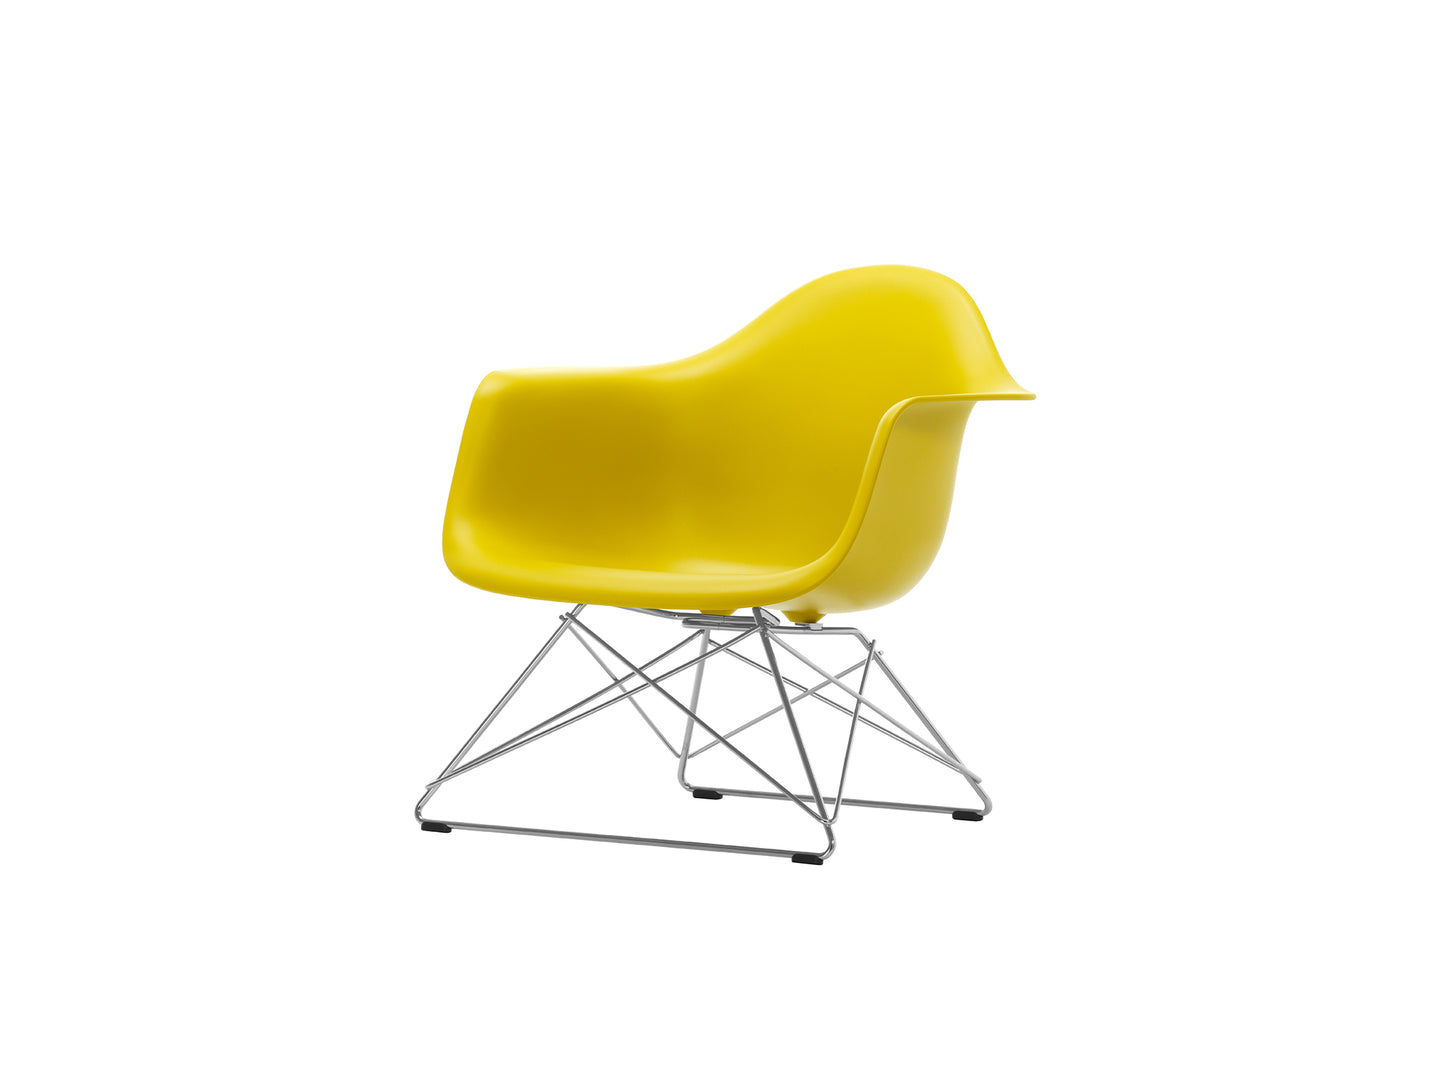 Eames Plastic Armchair LAR by Vitra - Mustard 34 Shell / Chrome-Plated Steel Base